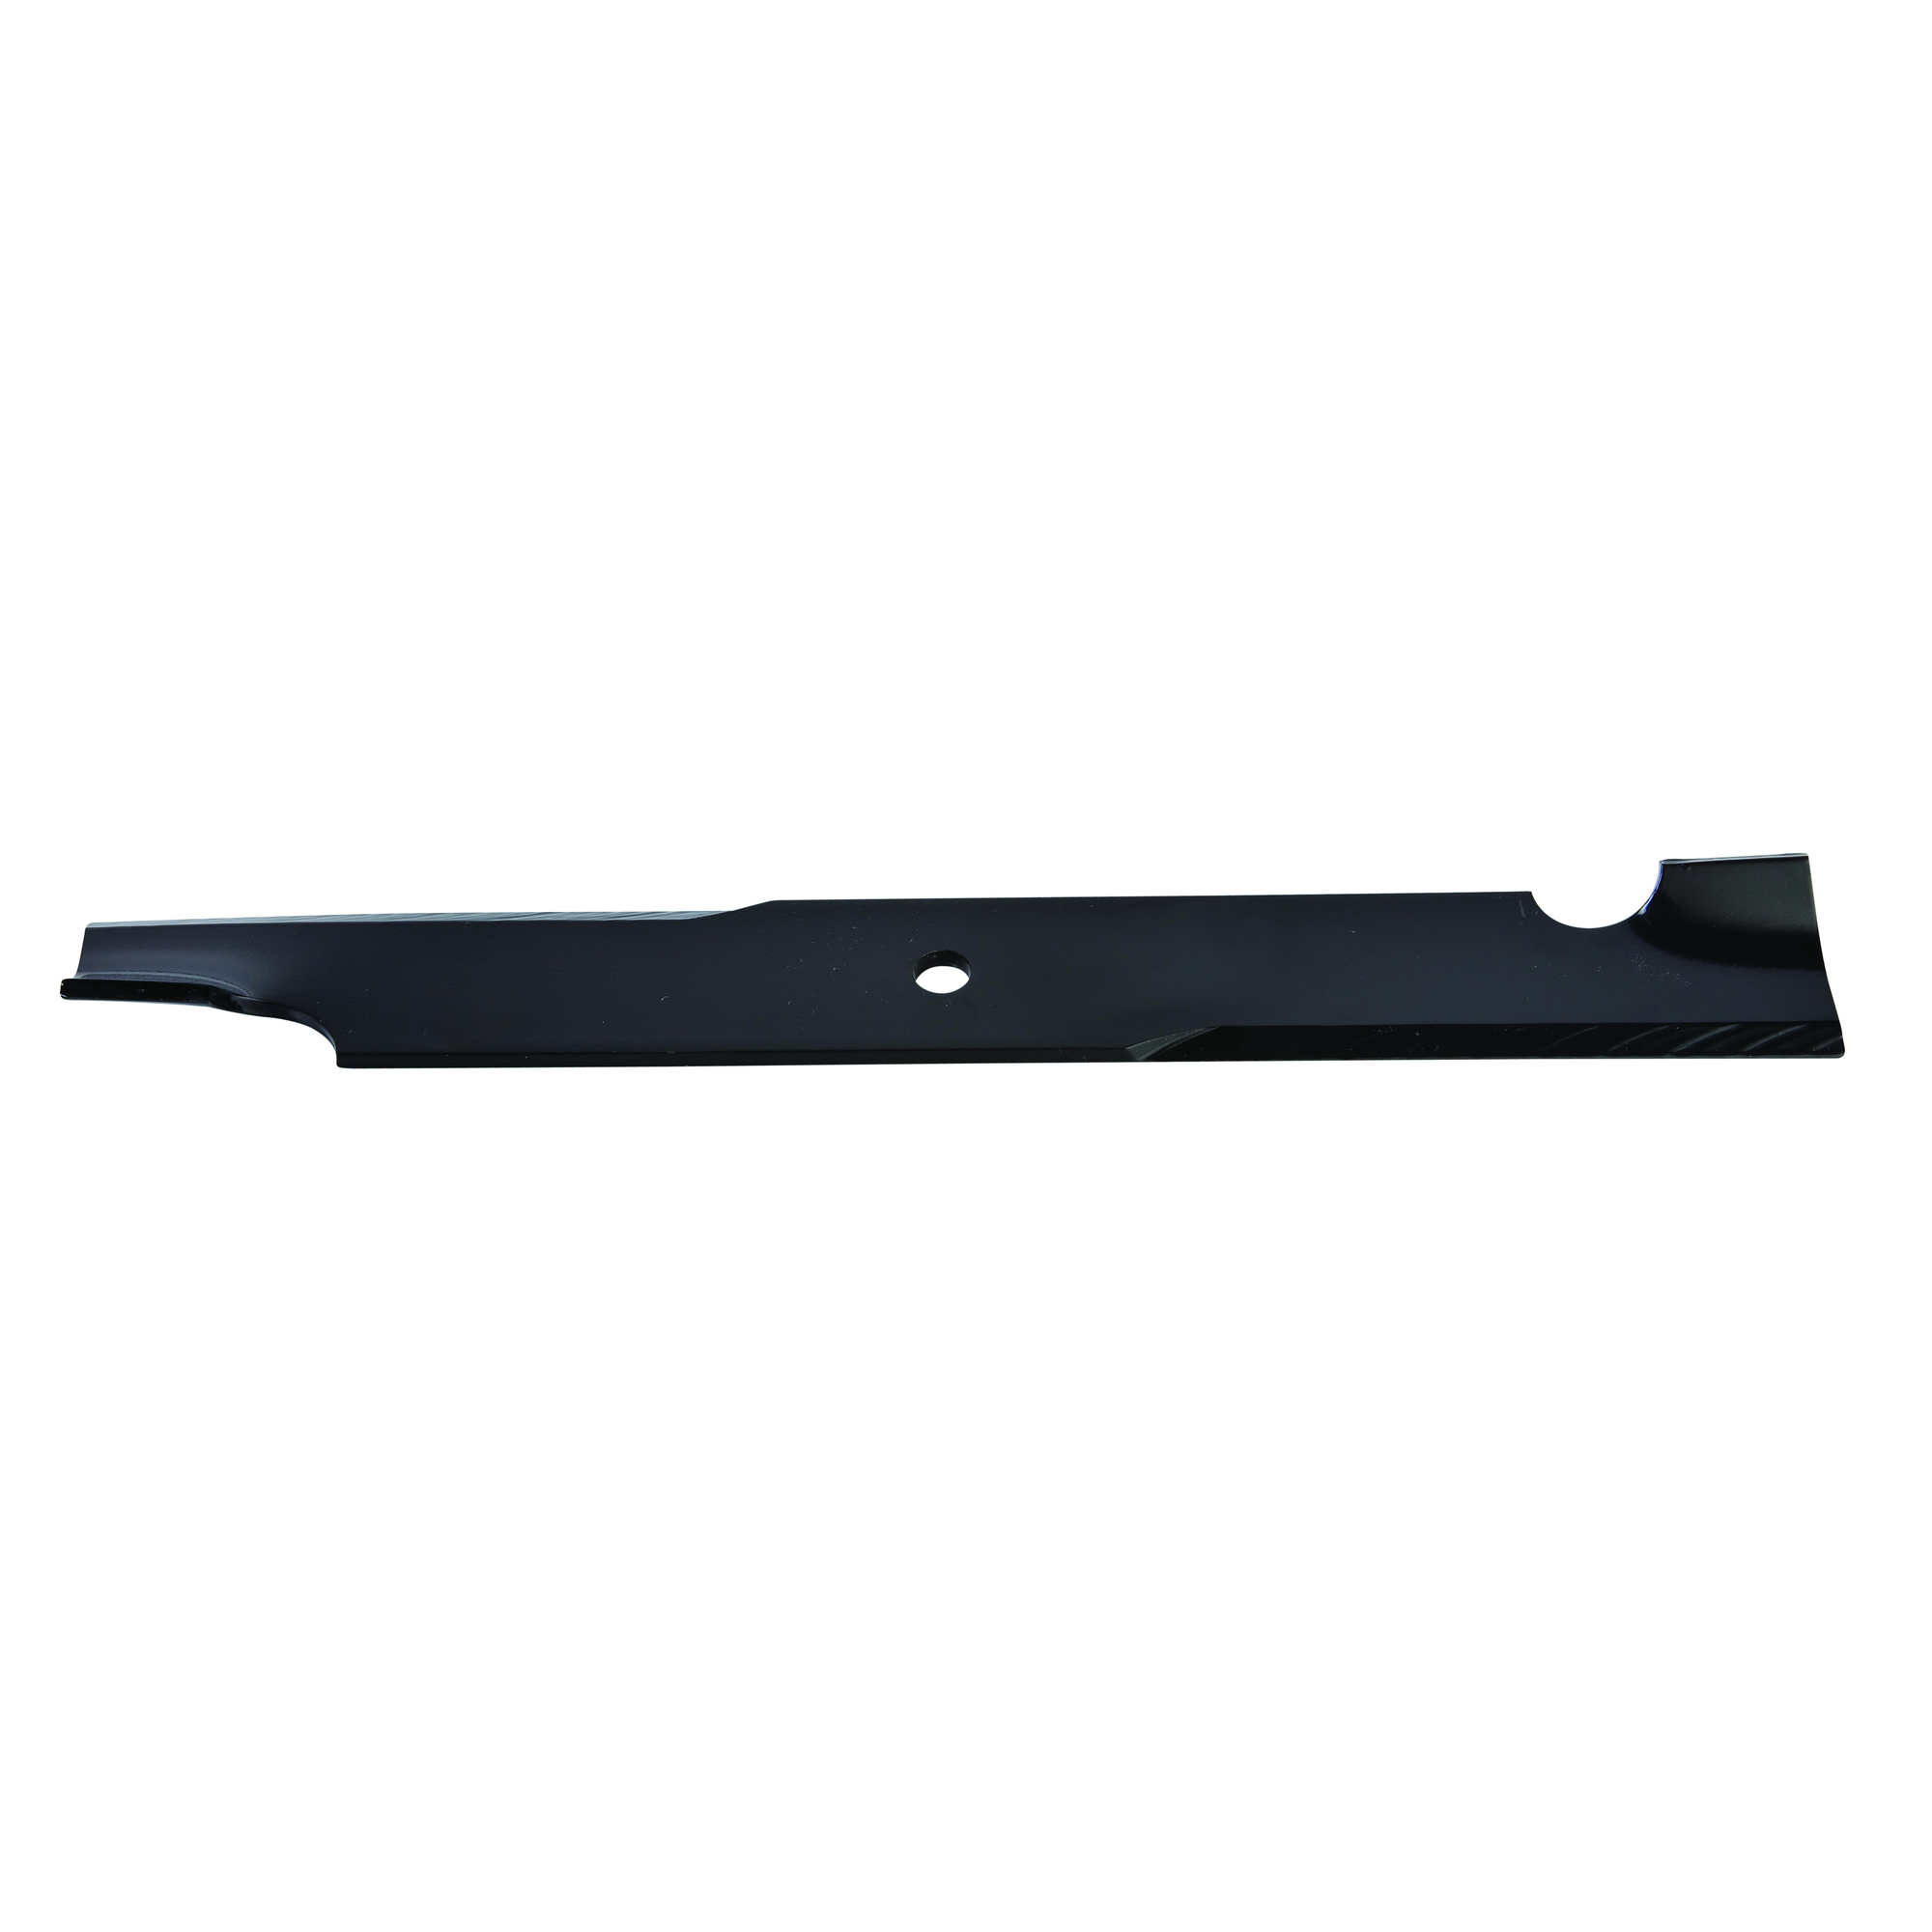 Oregon, Replacement Lawn Mower Blade, Length 18.125 in, Model 92-135